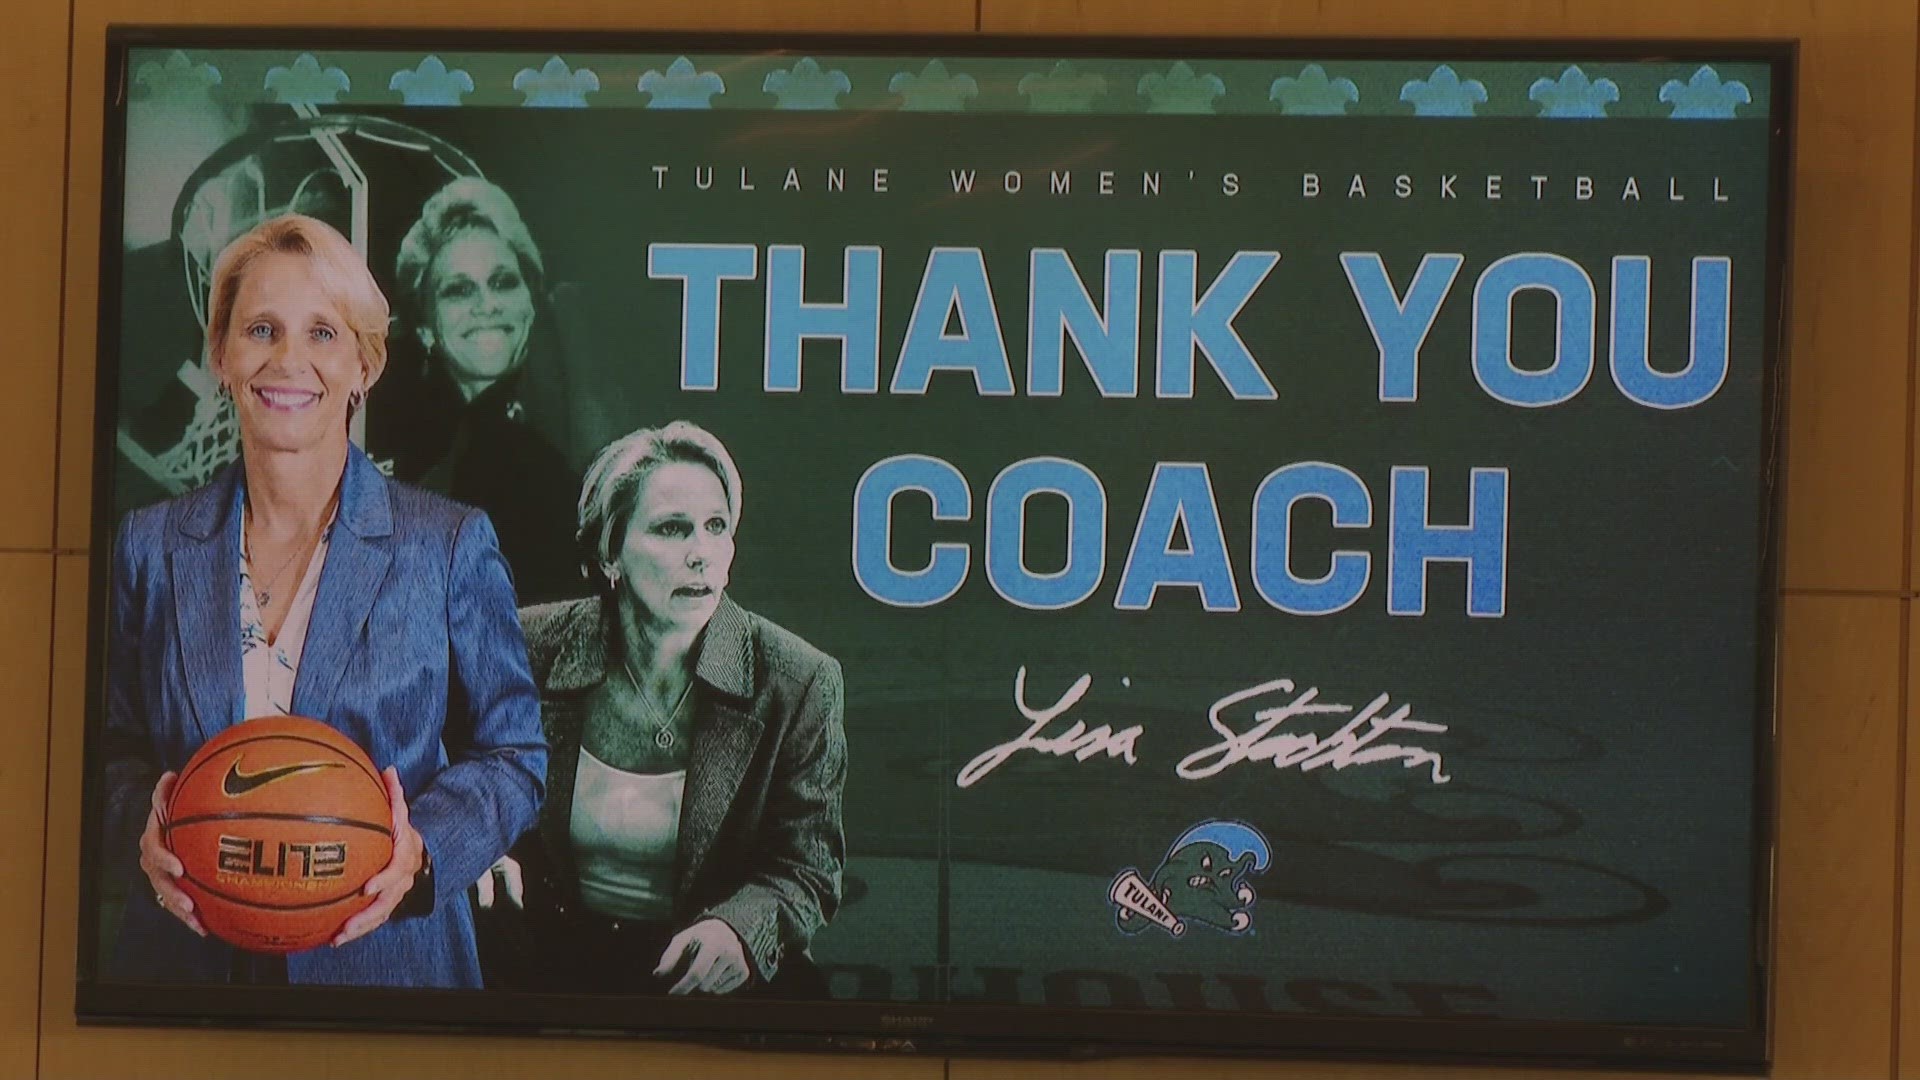 Lisa Stockton spent 30 seasons running the Tulane women's basketball program. In her time, she won 591 games and guided the Wave to the NCAA Tournament 11 times.